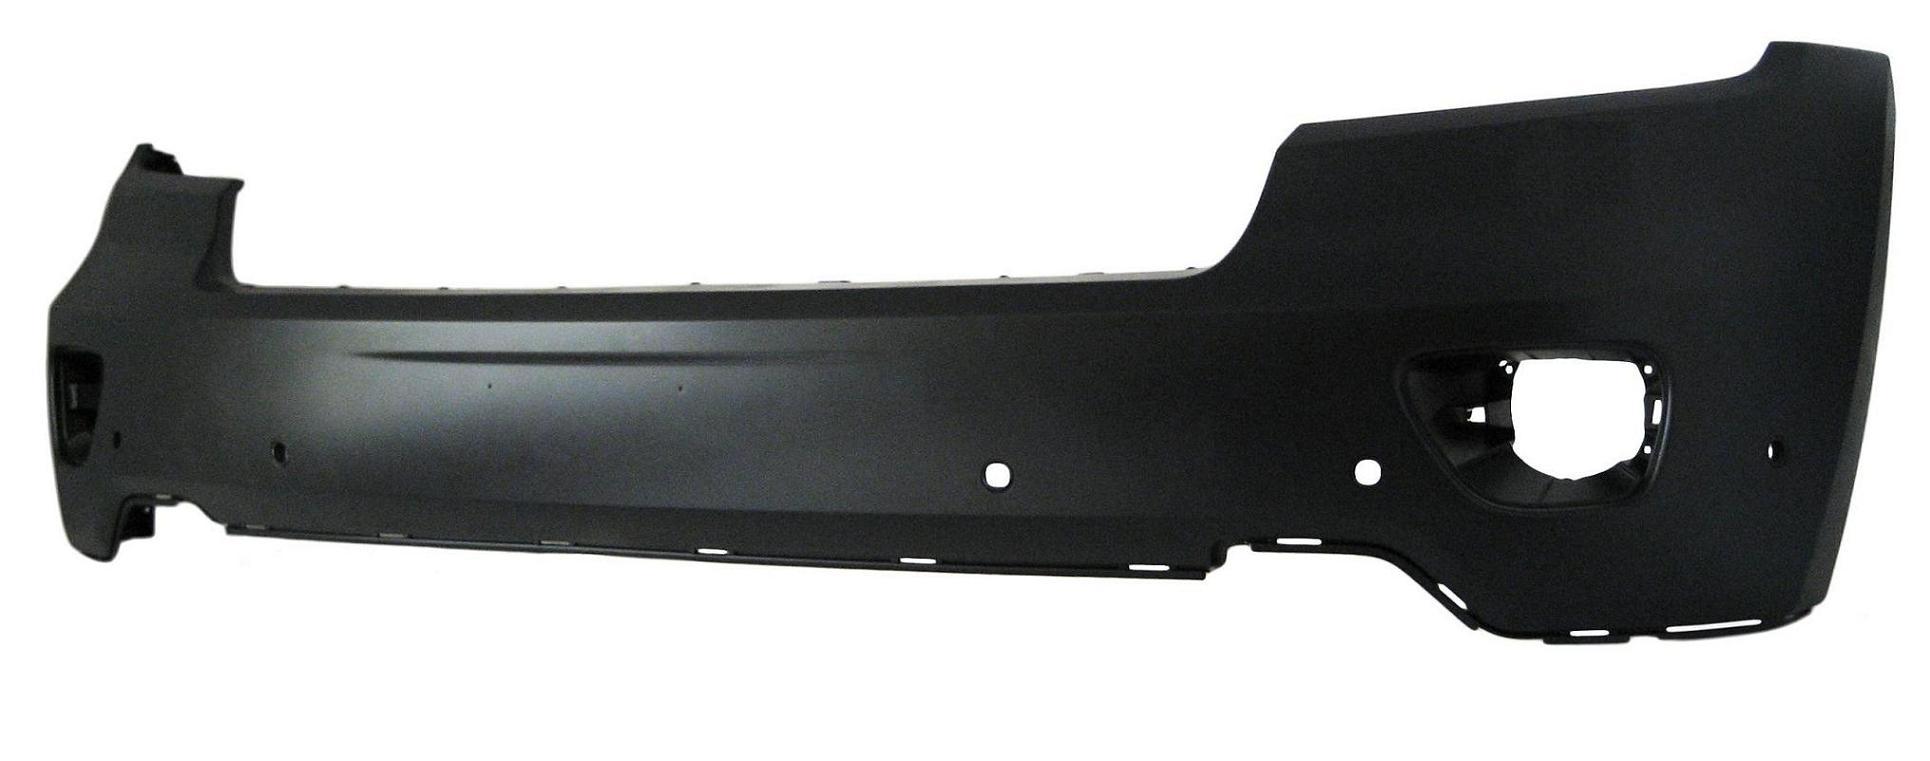 Aftermarket BUMPER COVERS for JEEP - GRAND CHEROKEE, GRAND CHEROKEE,14-16,Front bumper cover upper